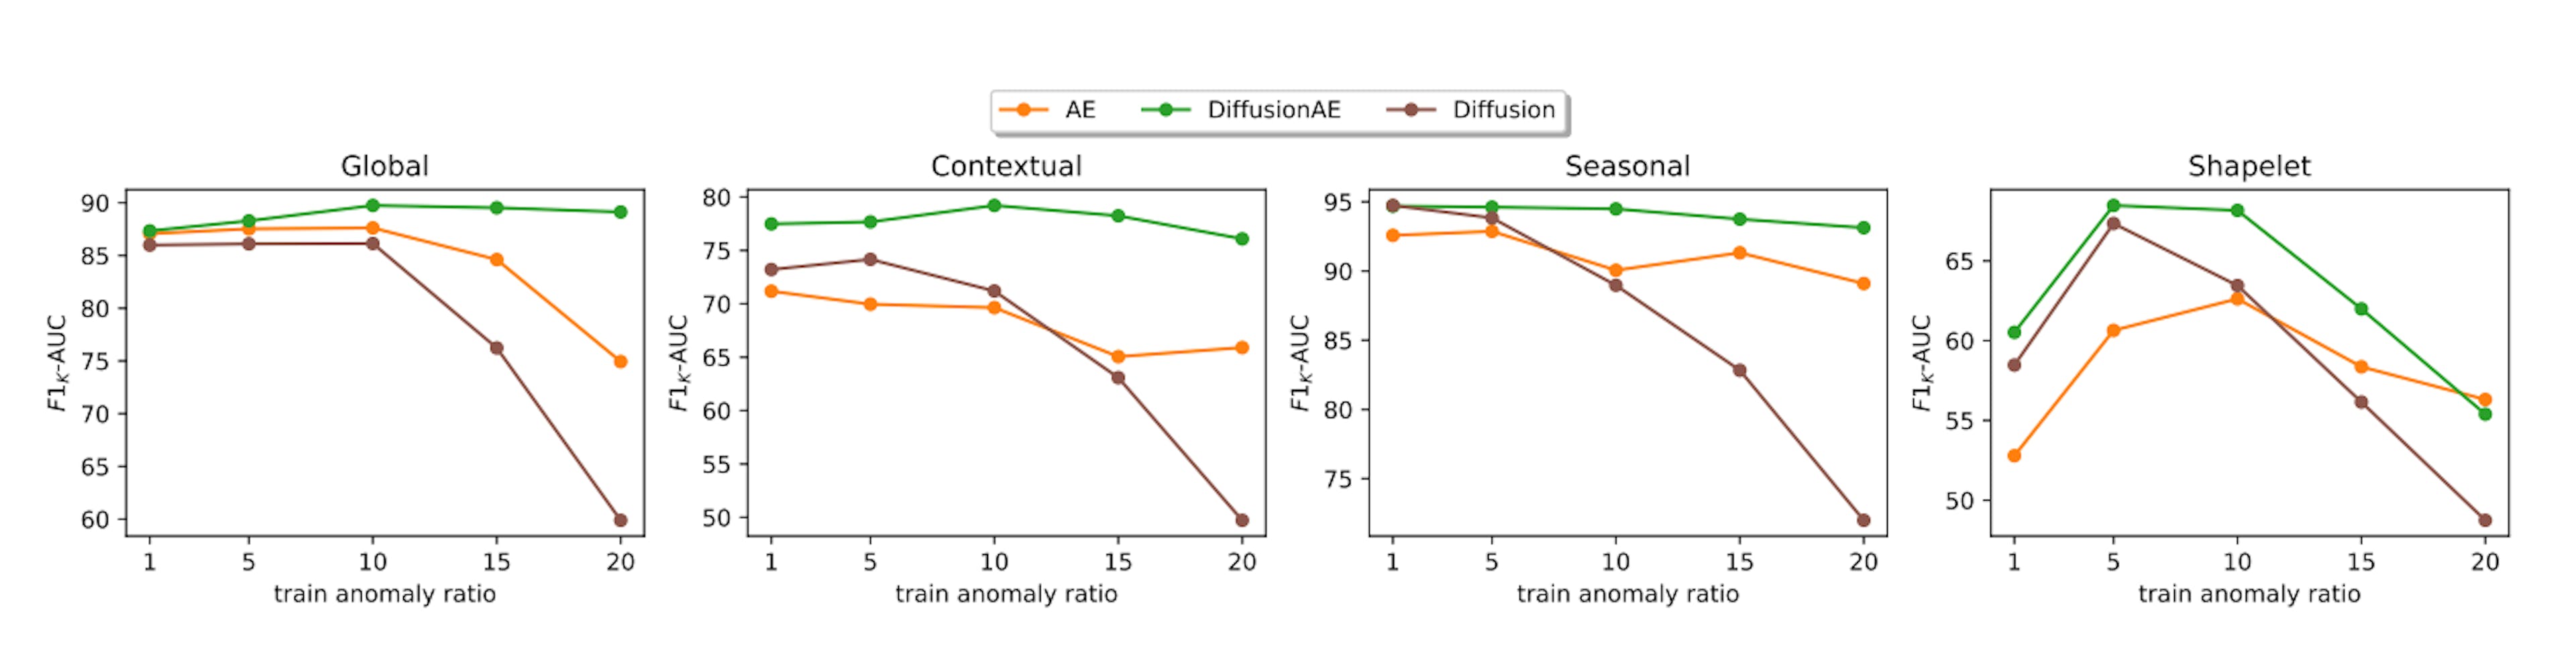  F1K-AUC for different ratios of anomaly in the training data. More explanation is available in the paper.